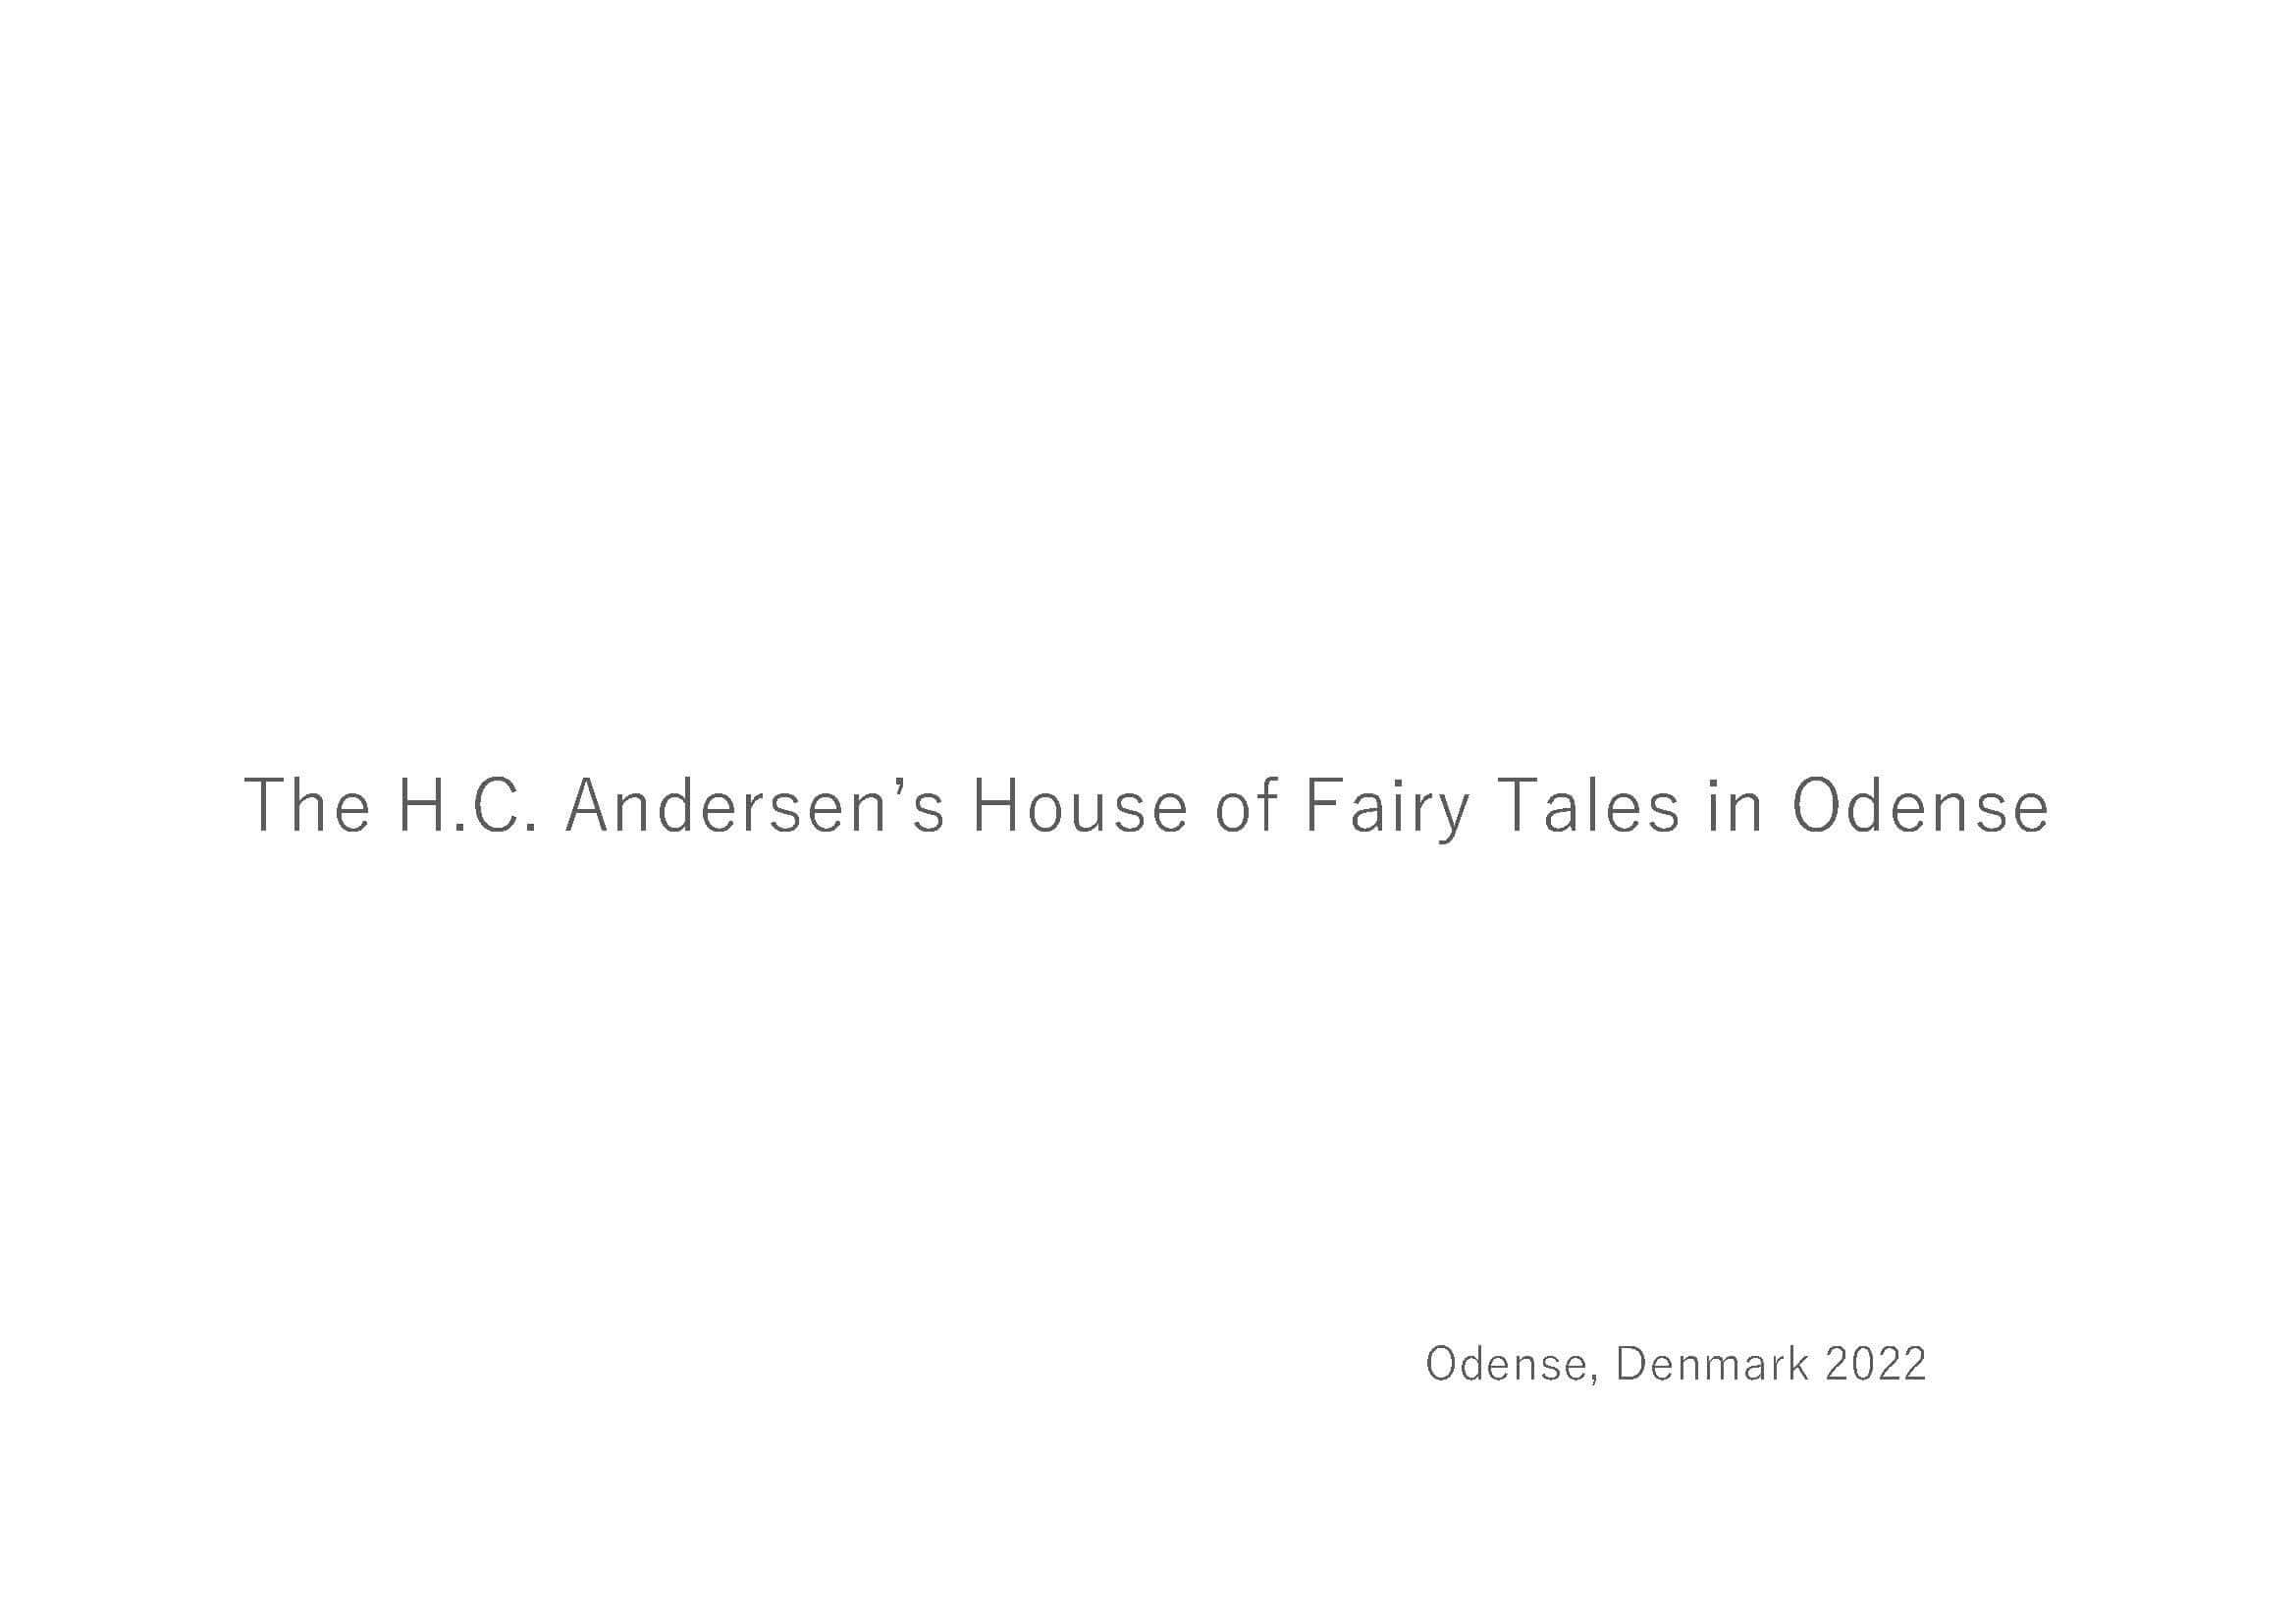 The H.C Andersen’s House of Fairy Tales in Odense01